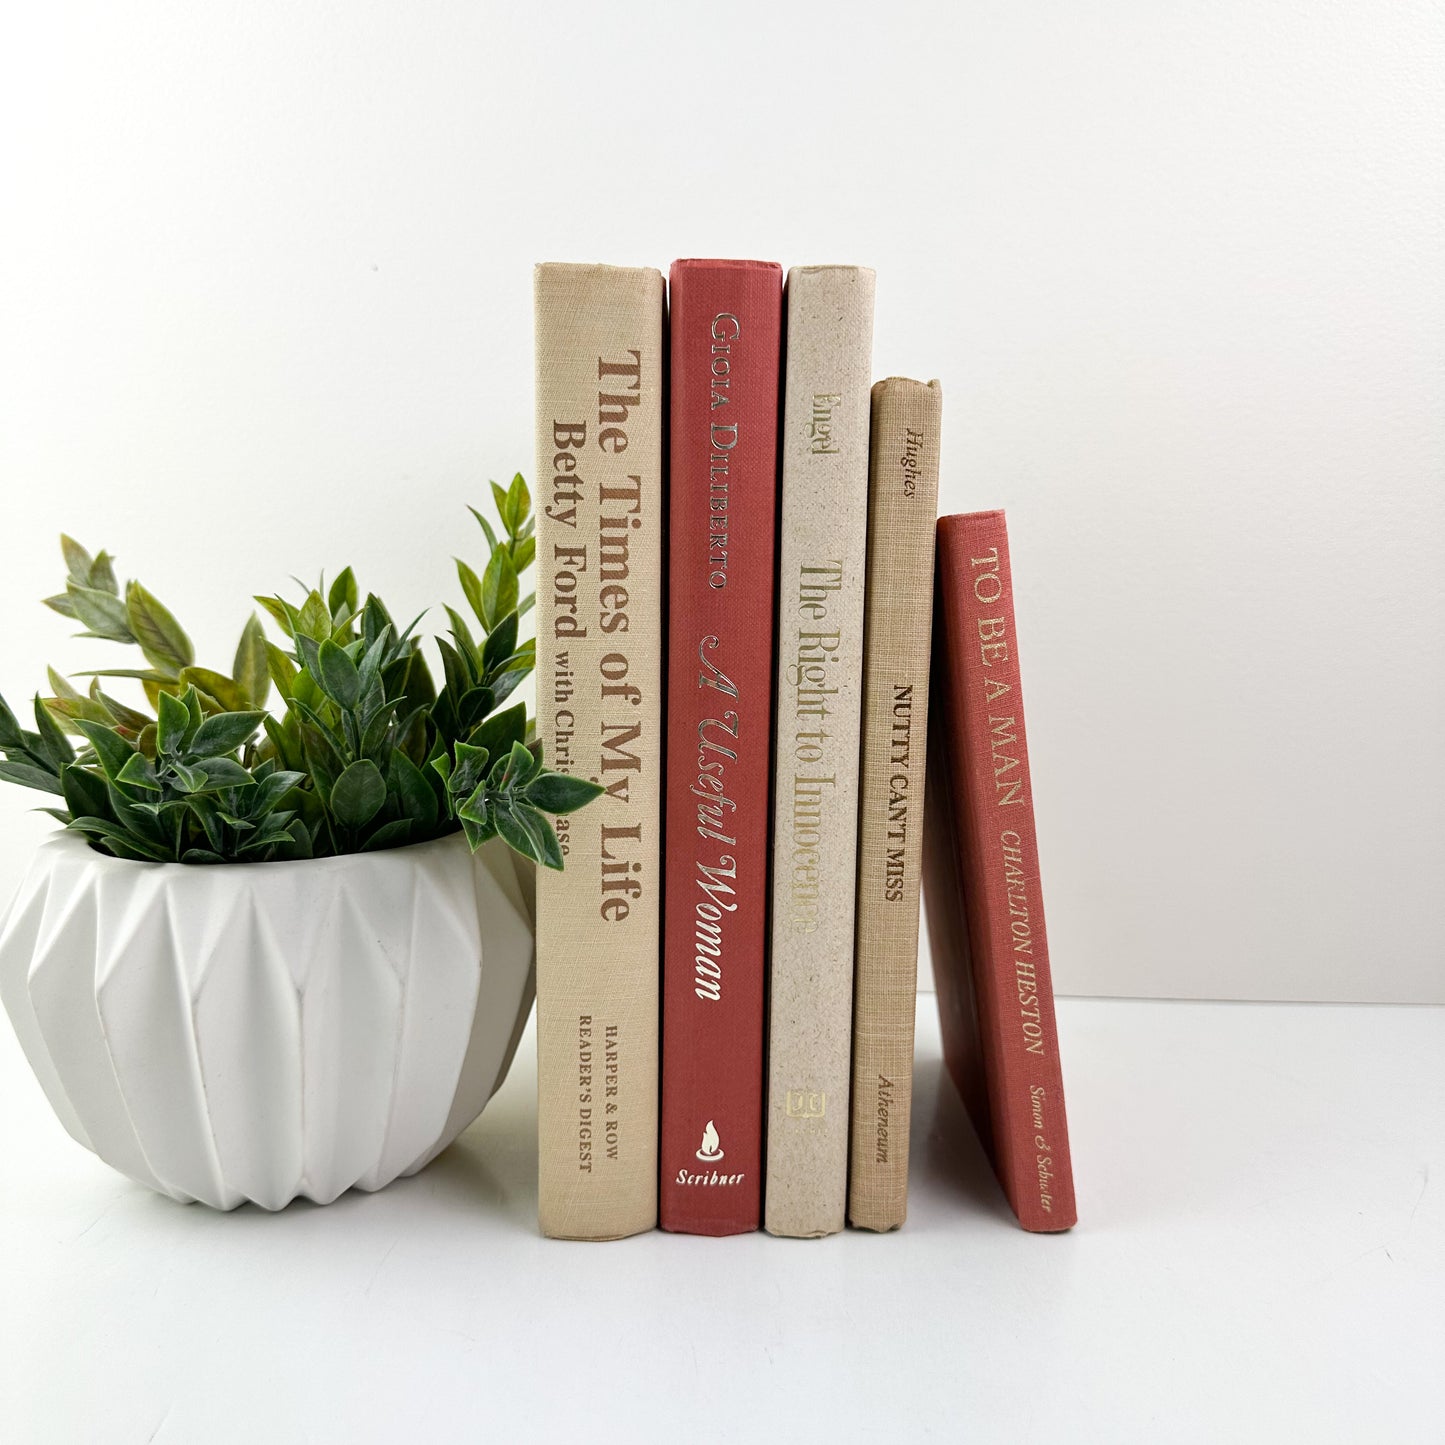 Books for Decoration